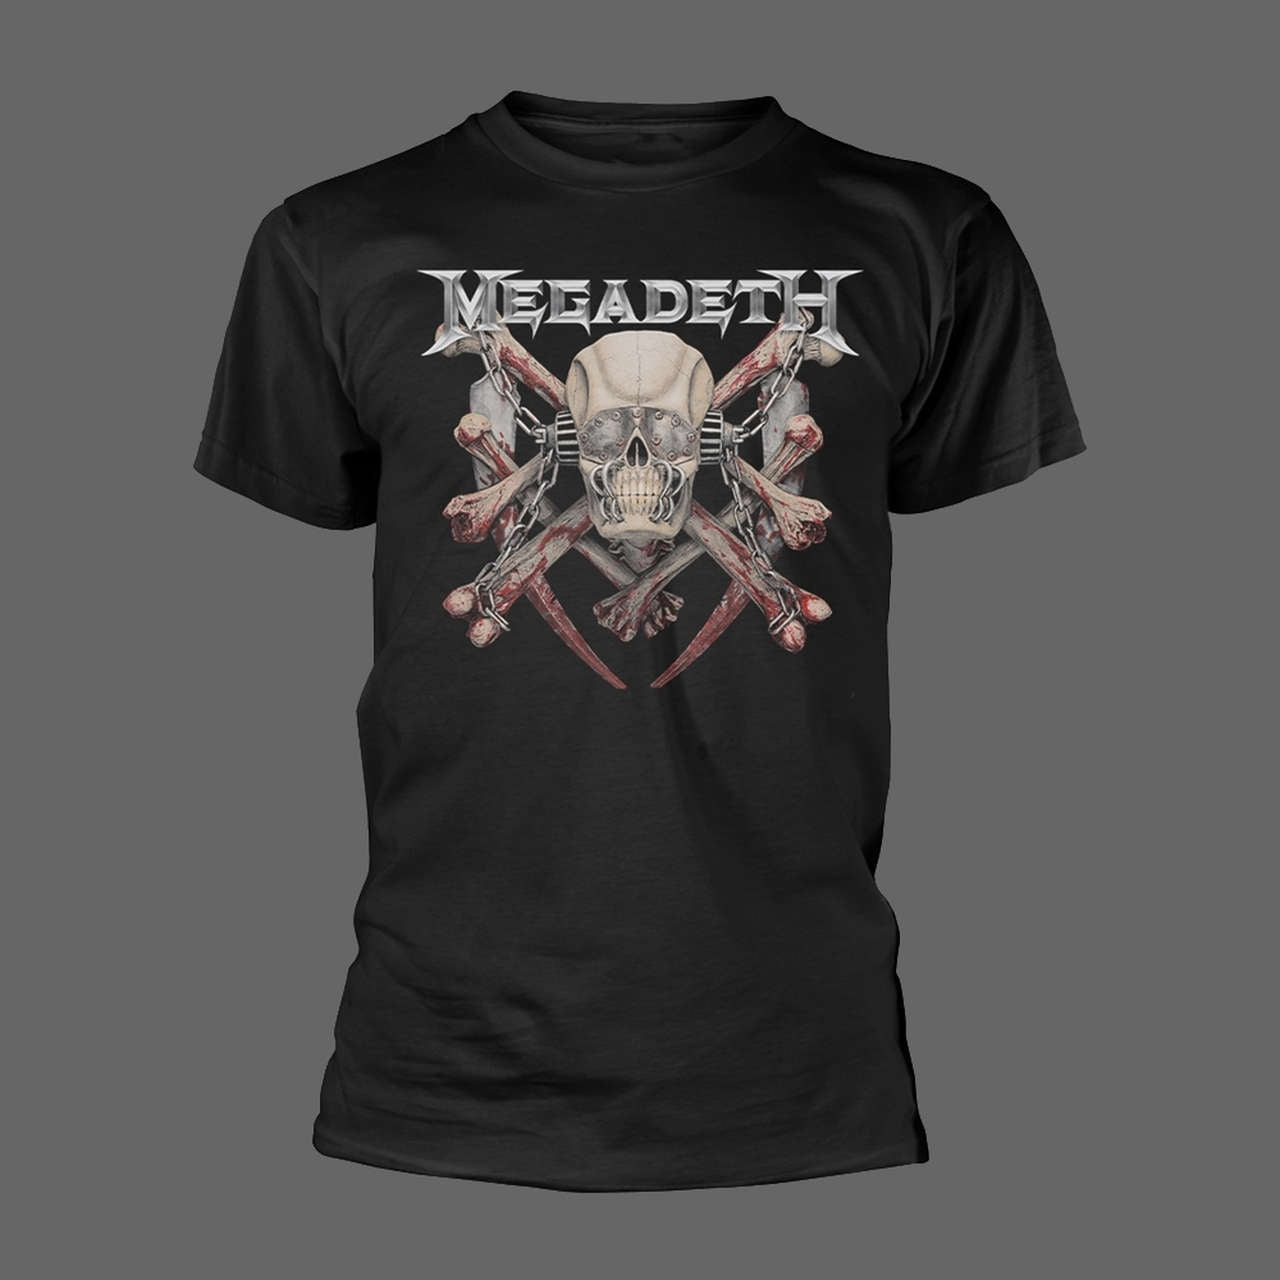 Megadeth - Killing is My Business... And Business is Good (T-Shirt)